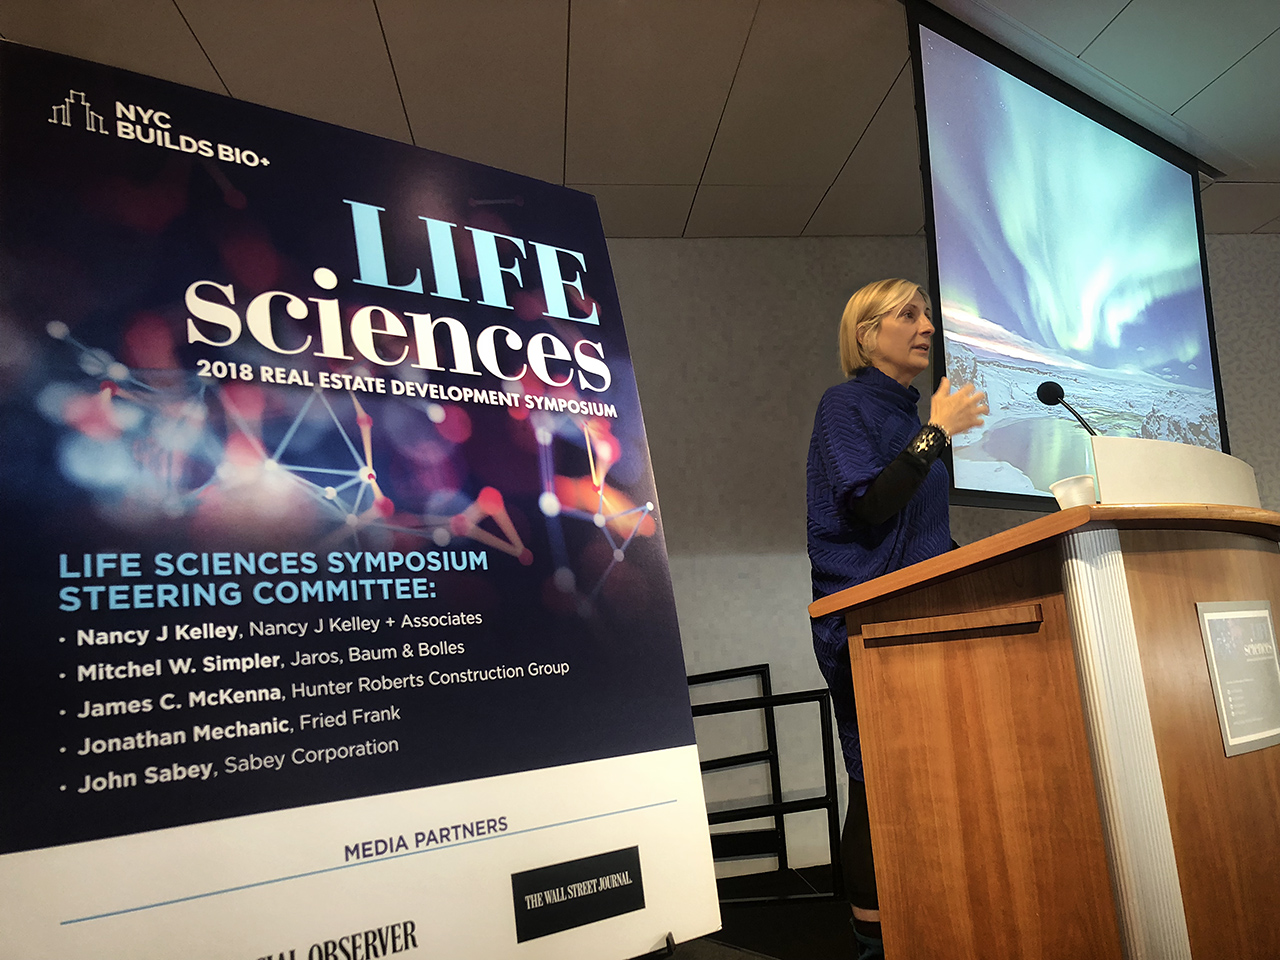 grimanesa amoros gives a lecture for the Life Sciences Symposium